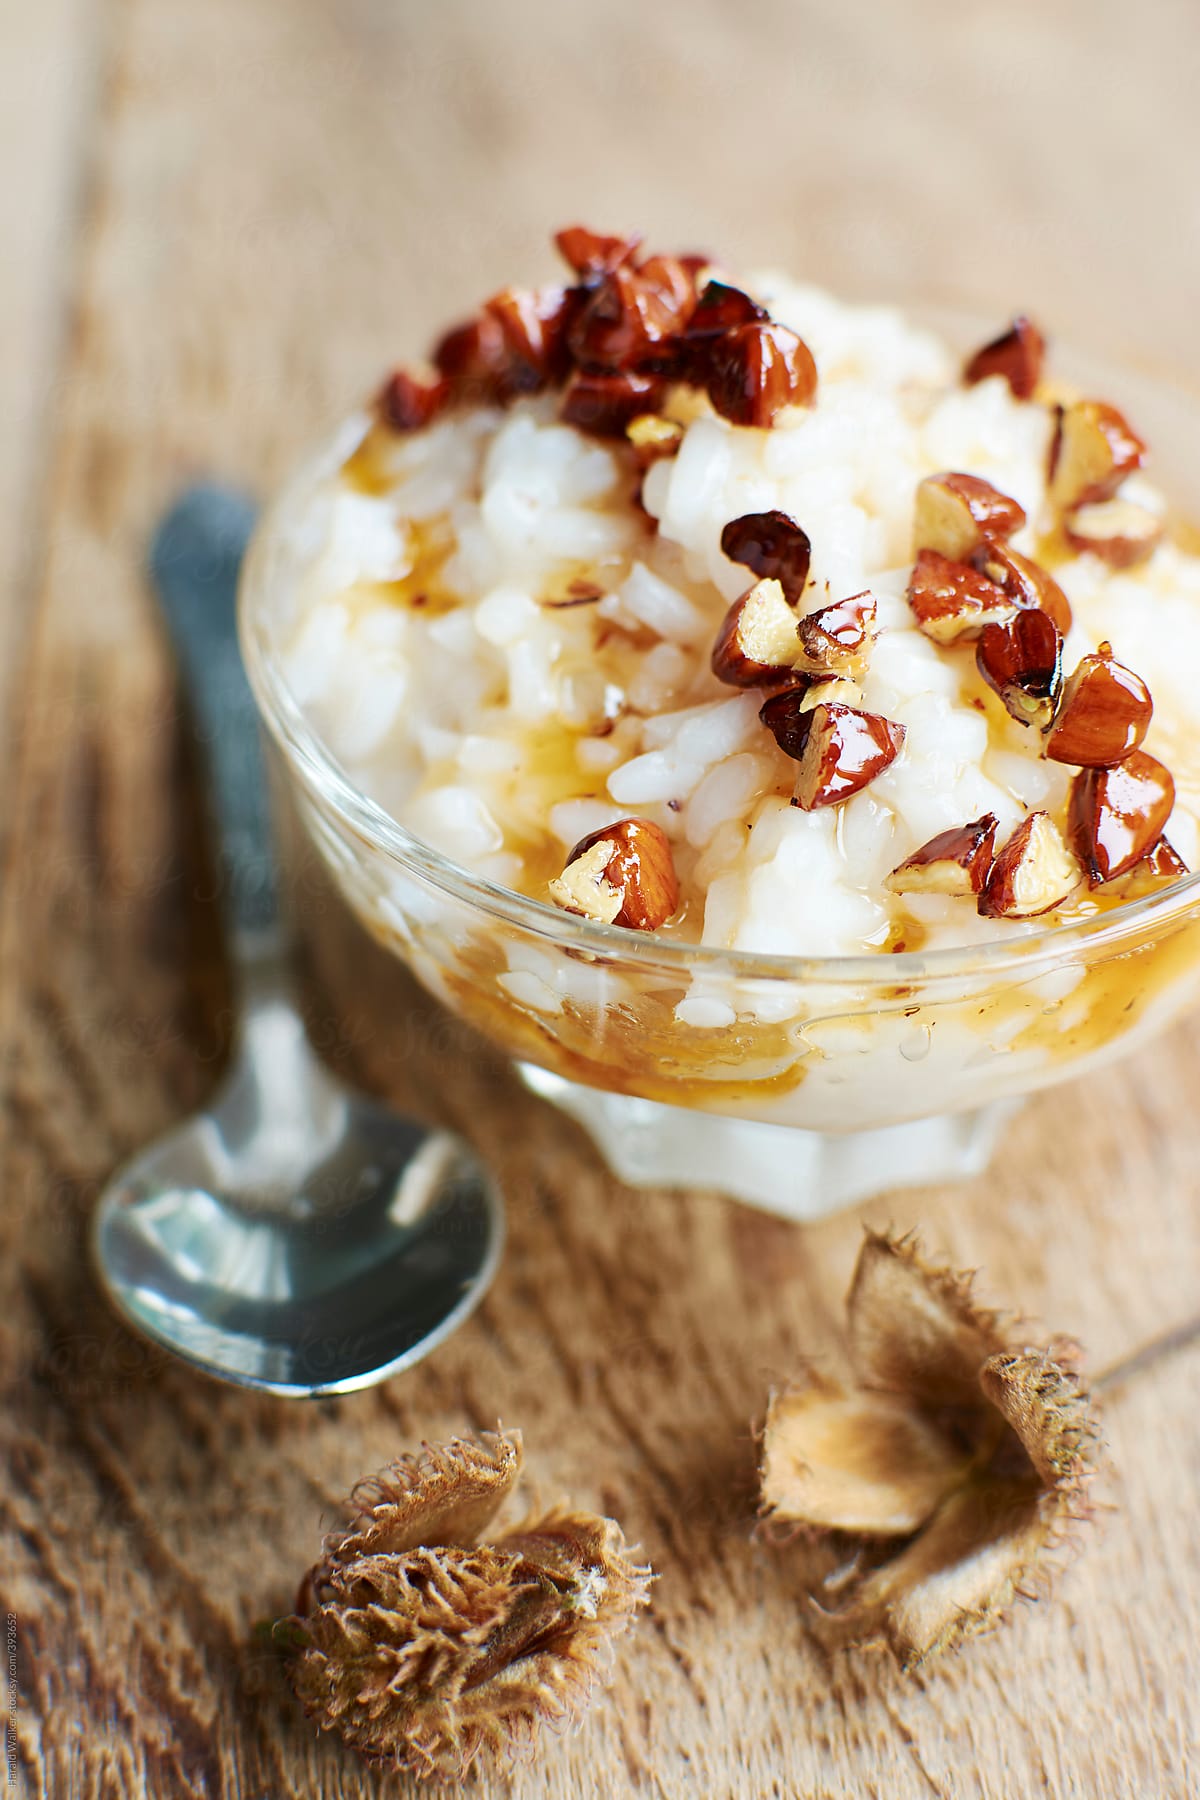 Beechnut topping over Rice Pudding